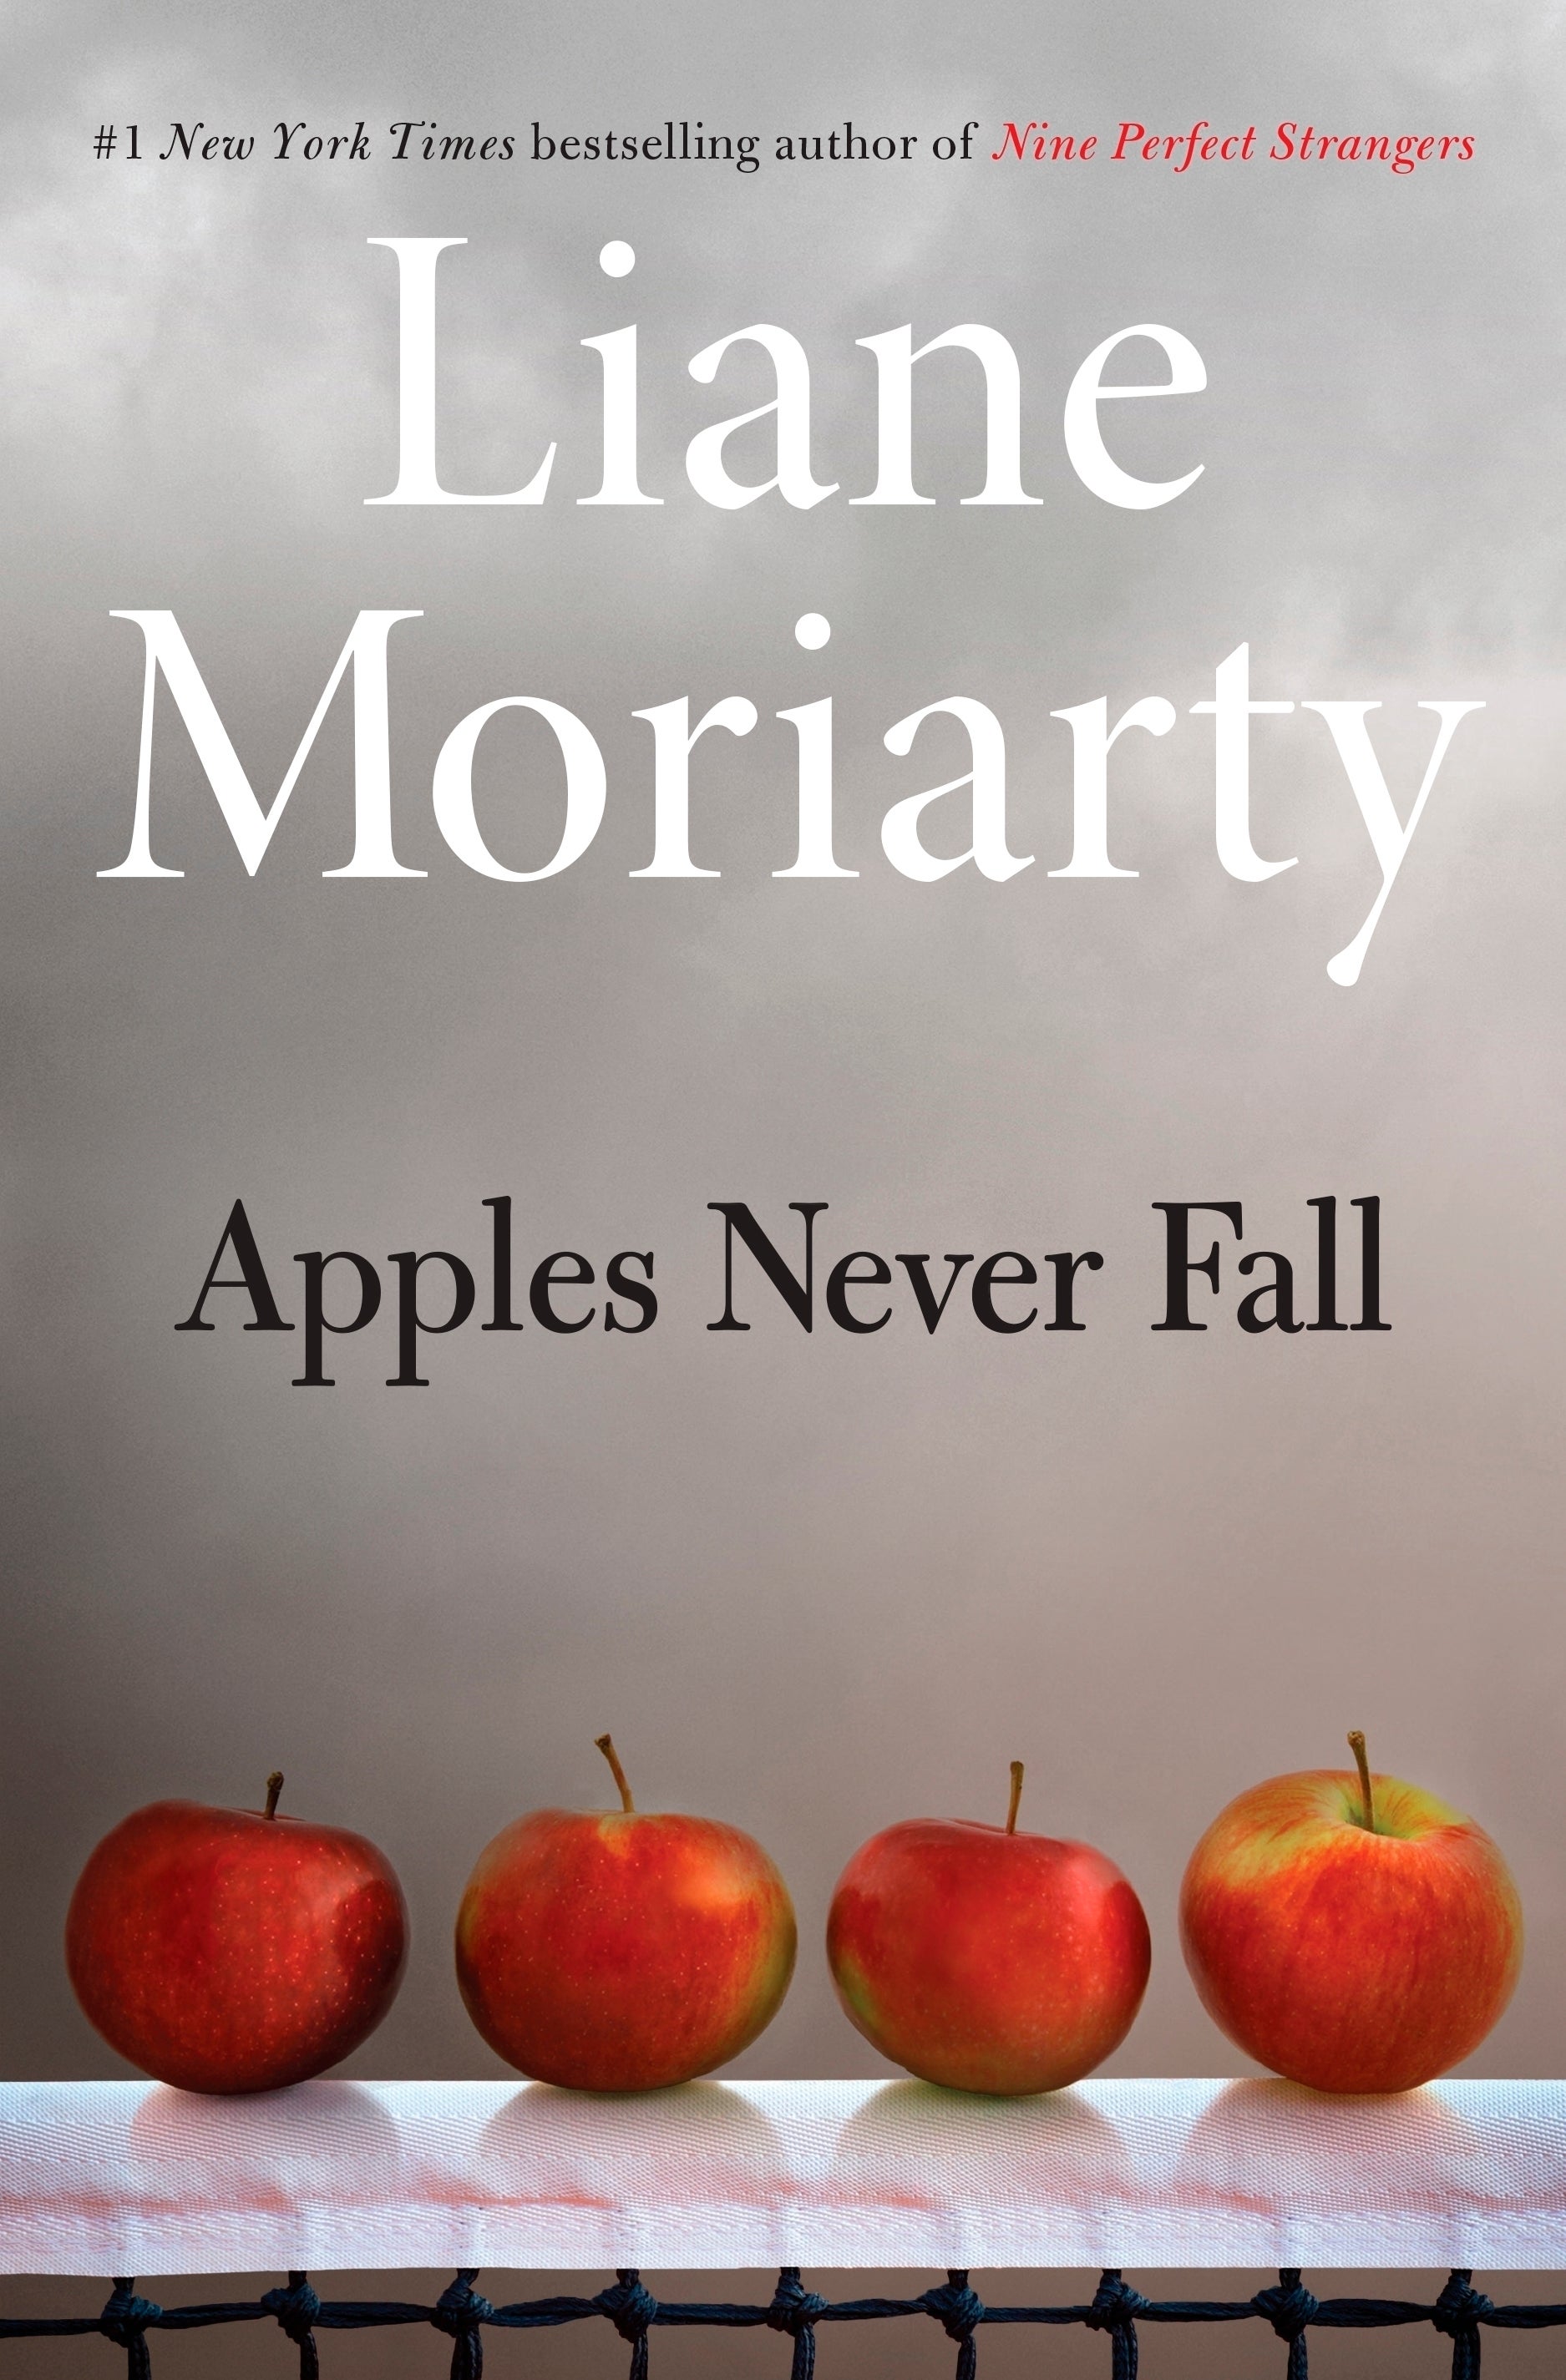 Book Review - Apples Never Fall